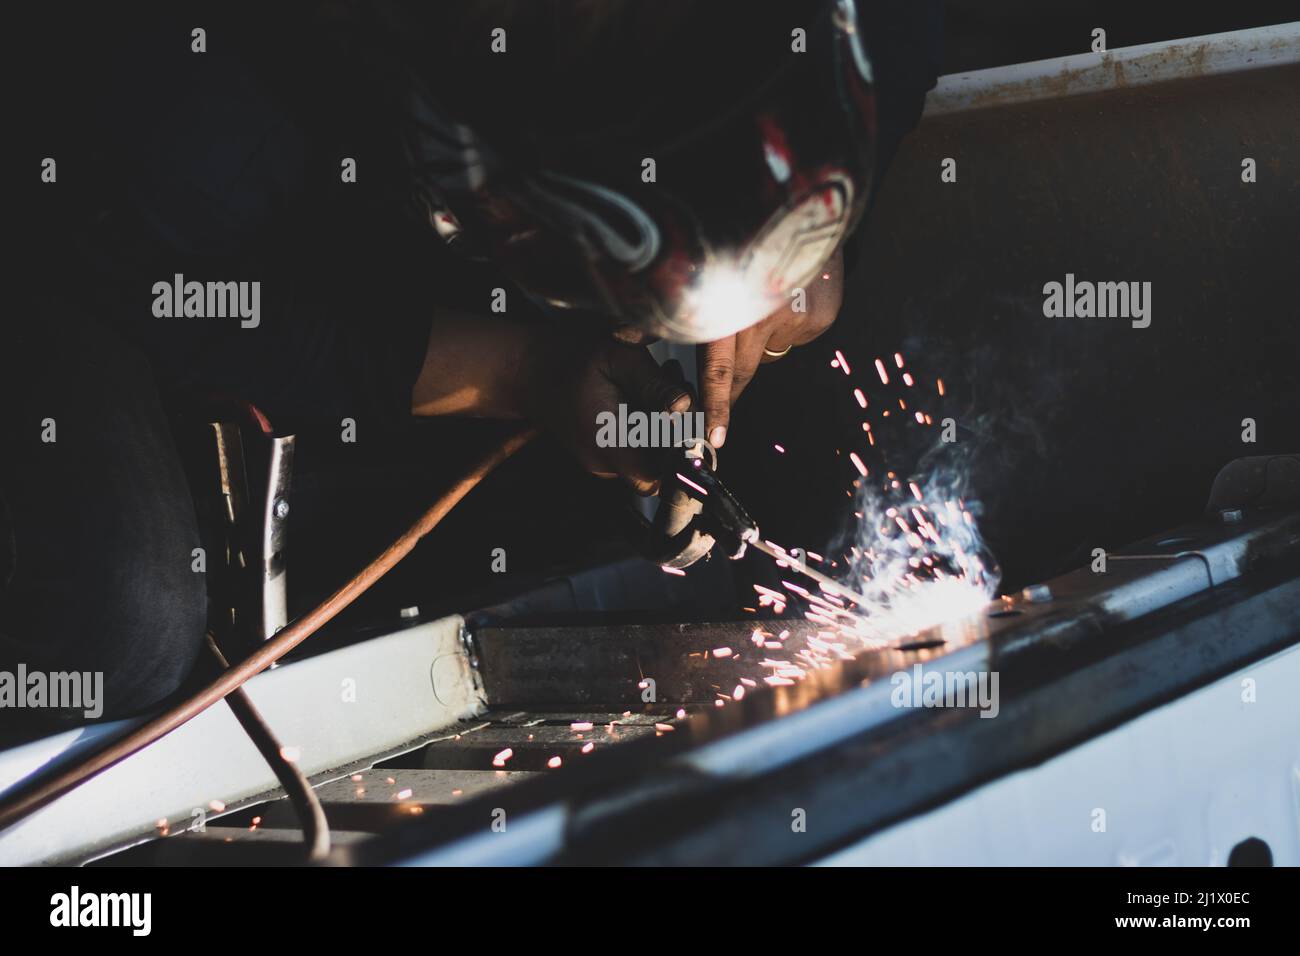 A closeup shot of a  metal fabricator making automotive welding with flames in a car factory Stock Photo